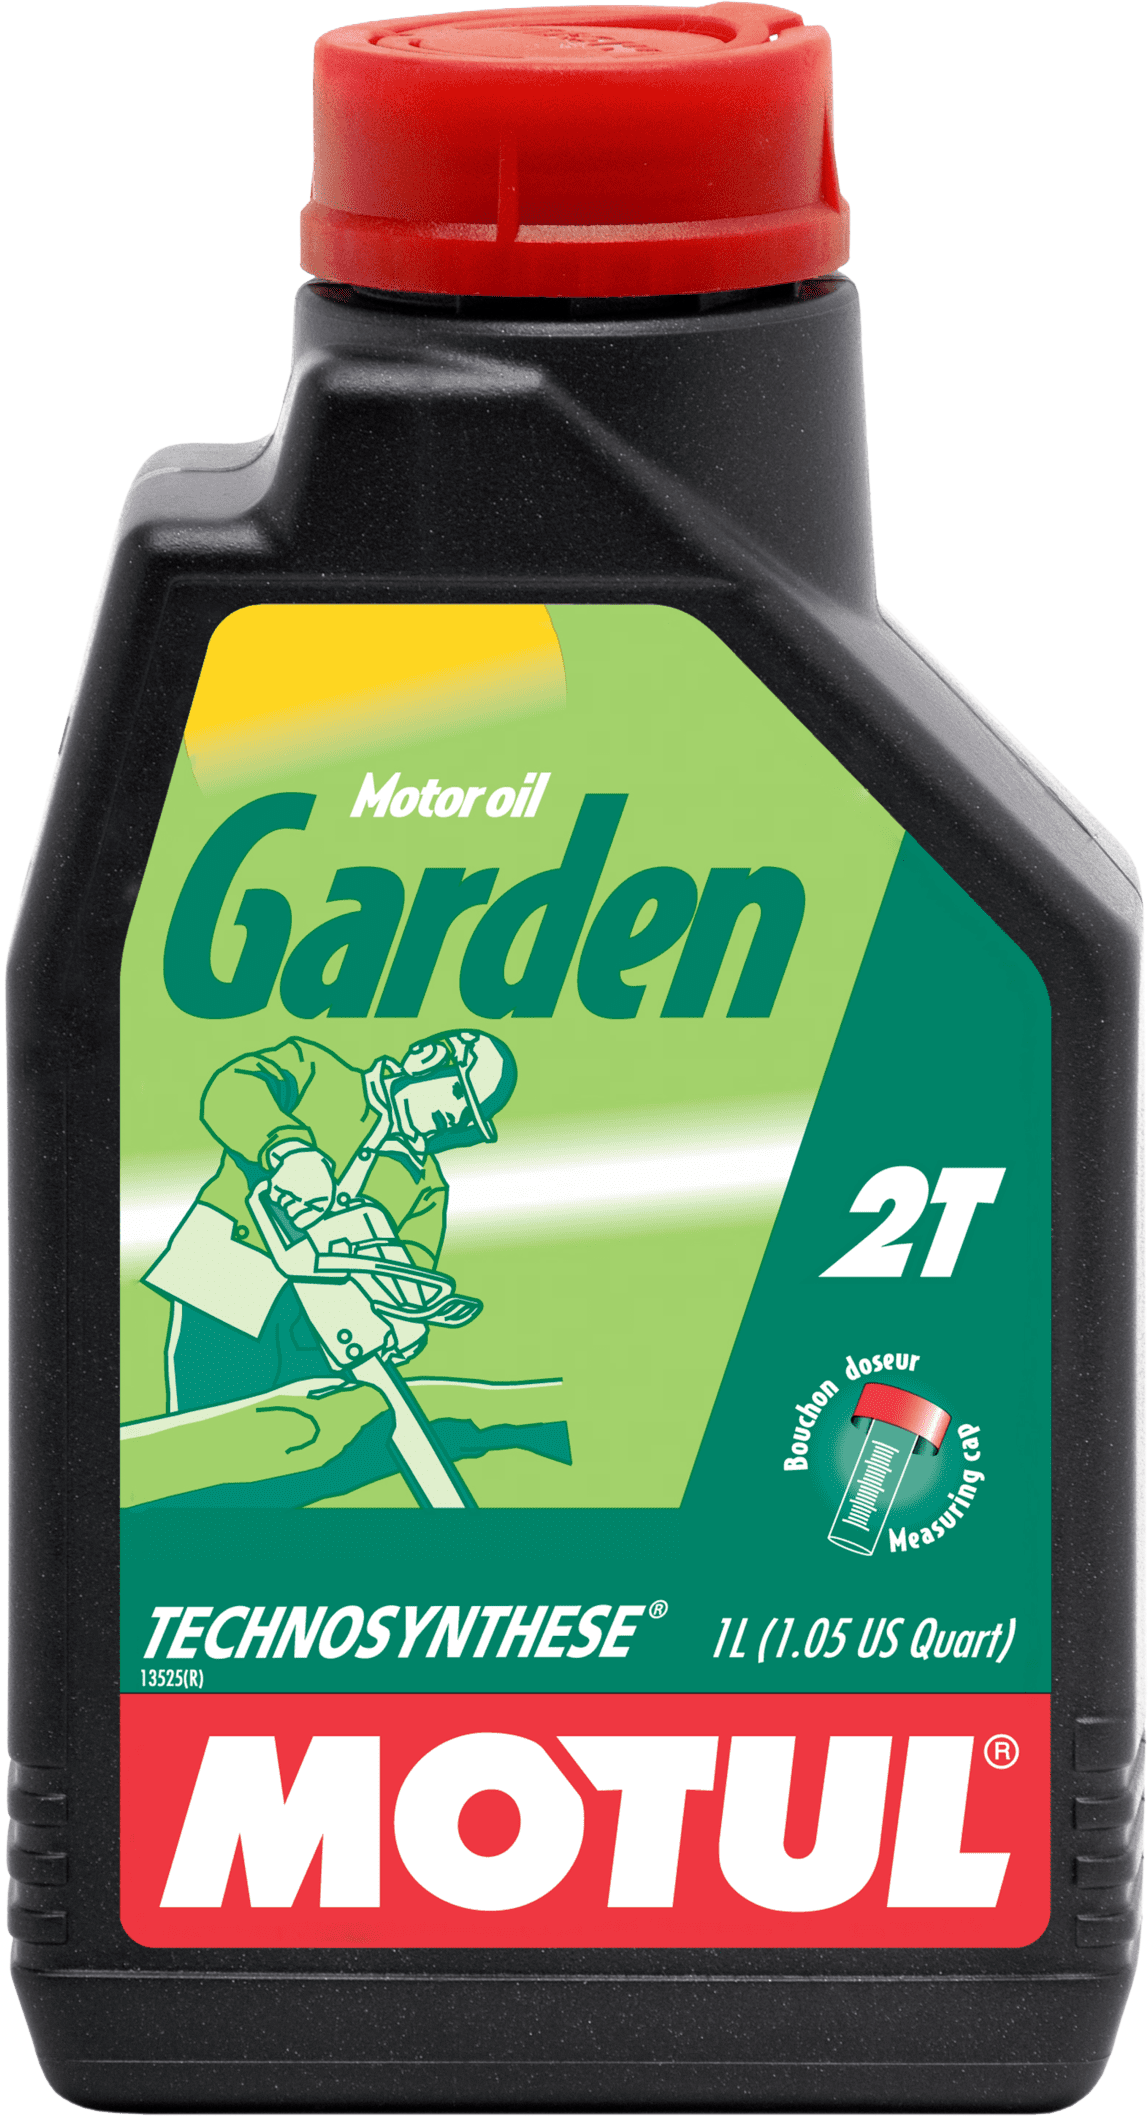 106280-1 Technosynthese® engine lubricant. Specially developed for 2-Stroke engine garden tools (moto cultivator, chain saw, lawn mower, ground clearing machine...) requiring API TC standard.